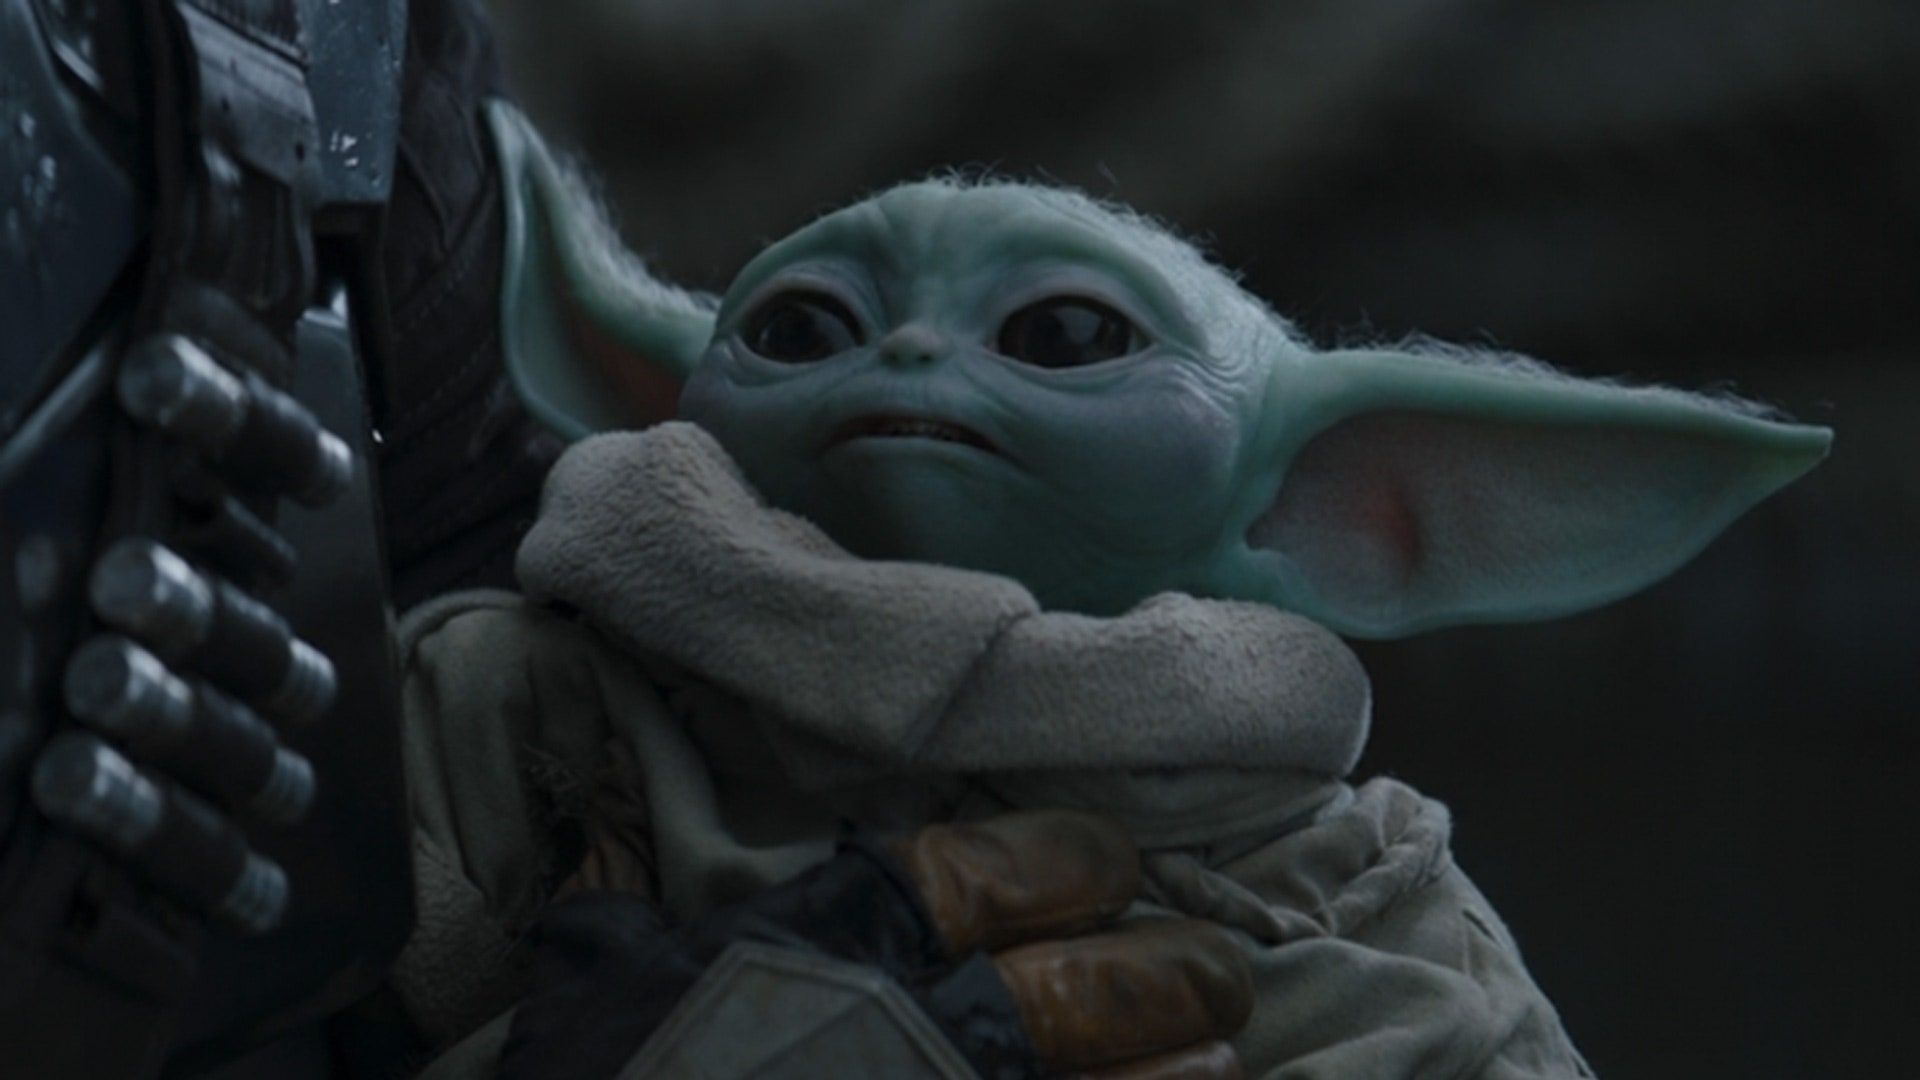 We finally know Baby Yoda's real name